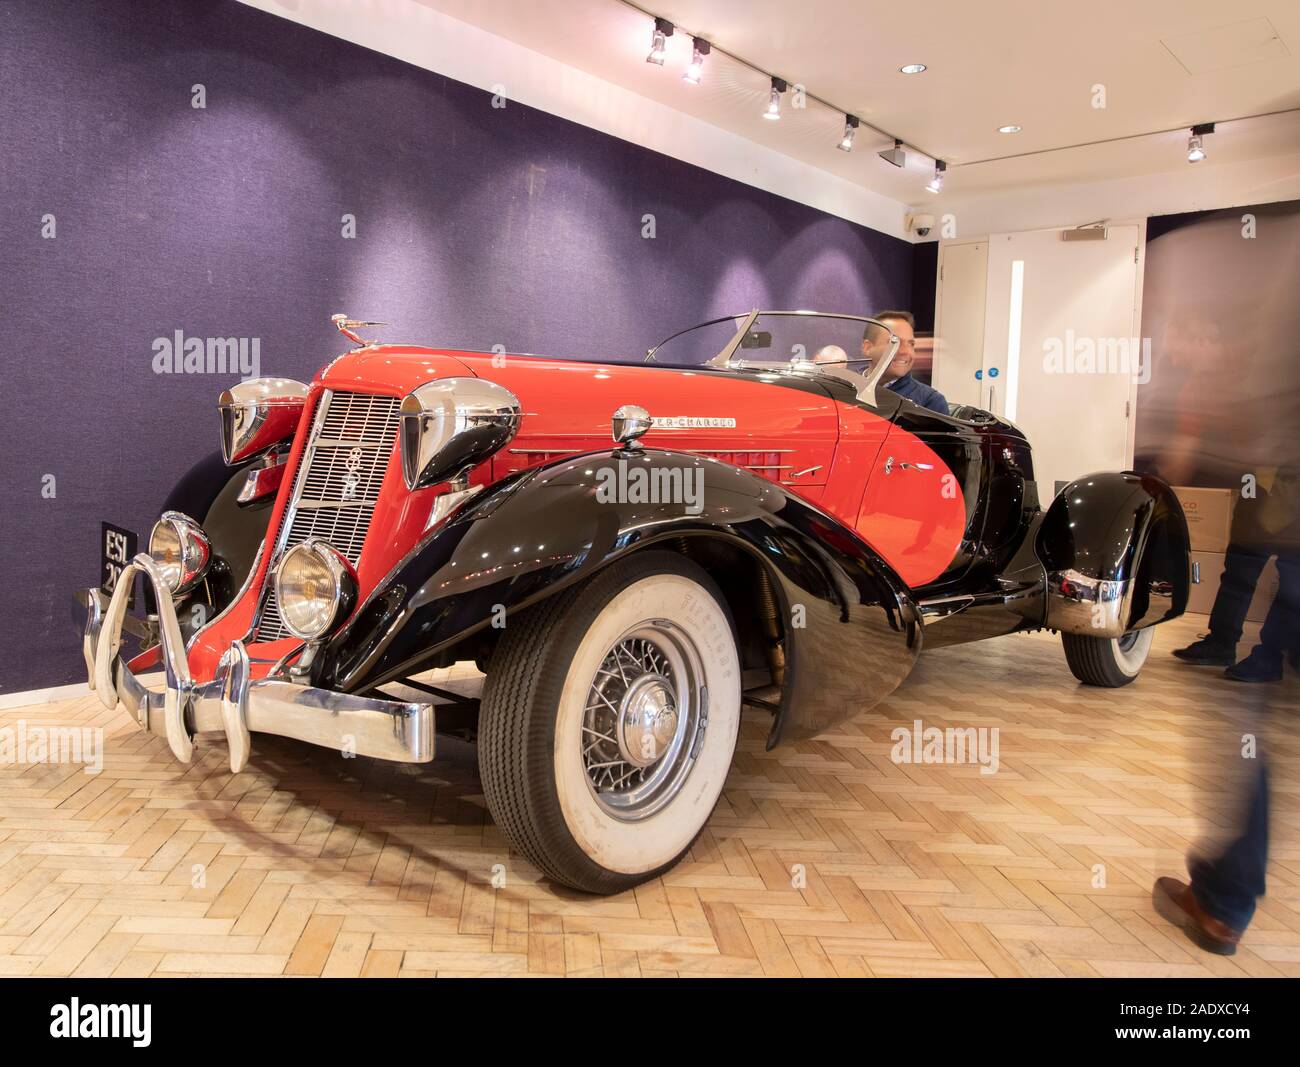 Bonhams, London, UK. 5th December 2019. Bonhams Bond Street Fine Collectors’ Motor Car sale preview includes cars owned by Jay Kay, Barbara Hutton, HRH The Prince of Wales, Jools Holland. The sale takes place on 7th December. Image: Ex-Barbara Hutton 1935 Auburn 851 Supercharged Boattail Speedster is manoeuvred into Bonhams. First owned by the ‘poor little rich girl’ Woolworth heiress and 1930s socialite, who bought it for her first husband, Prince Alexis Mdivani. Estimate £650,000–750,000. Credit: Malcolm Park/Alamy Live News. Stock Photo